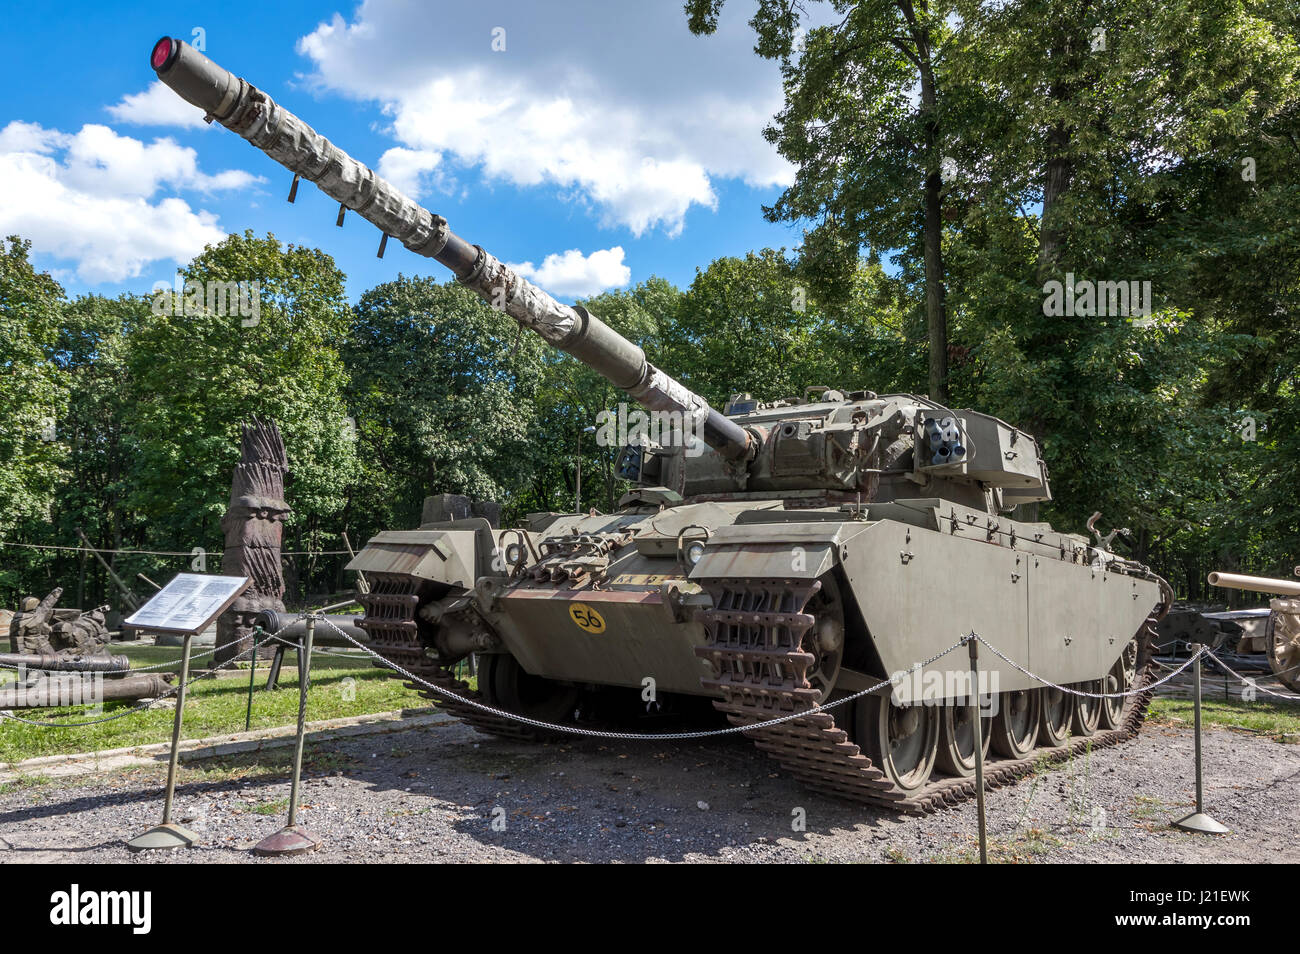 Centurion Tank High Resolution Stock Photography and Images - Alamy